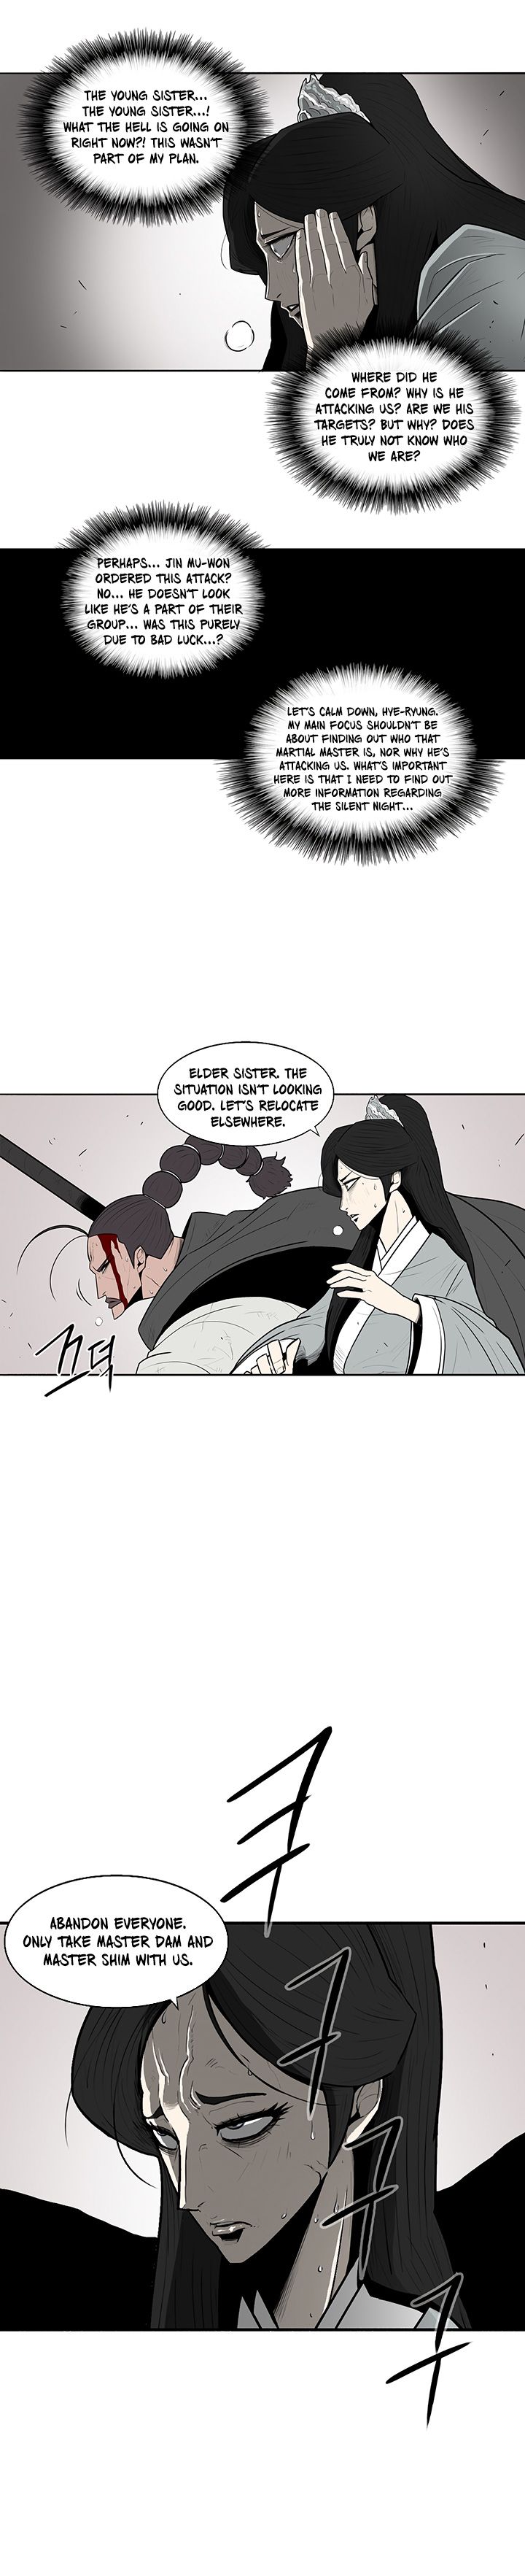 Legend of the Northern Blade chapter 11 page 5